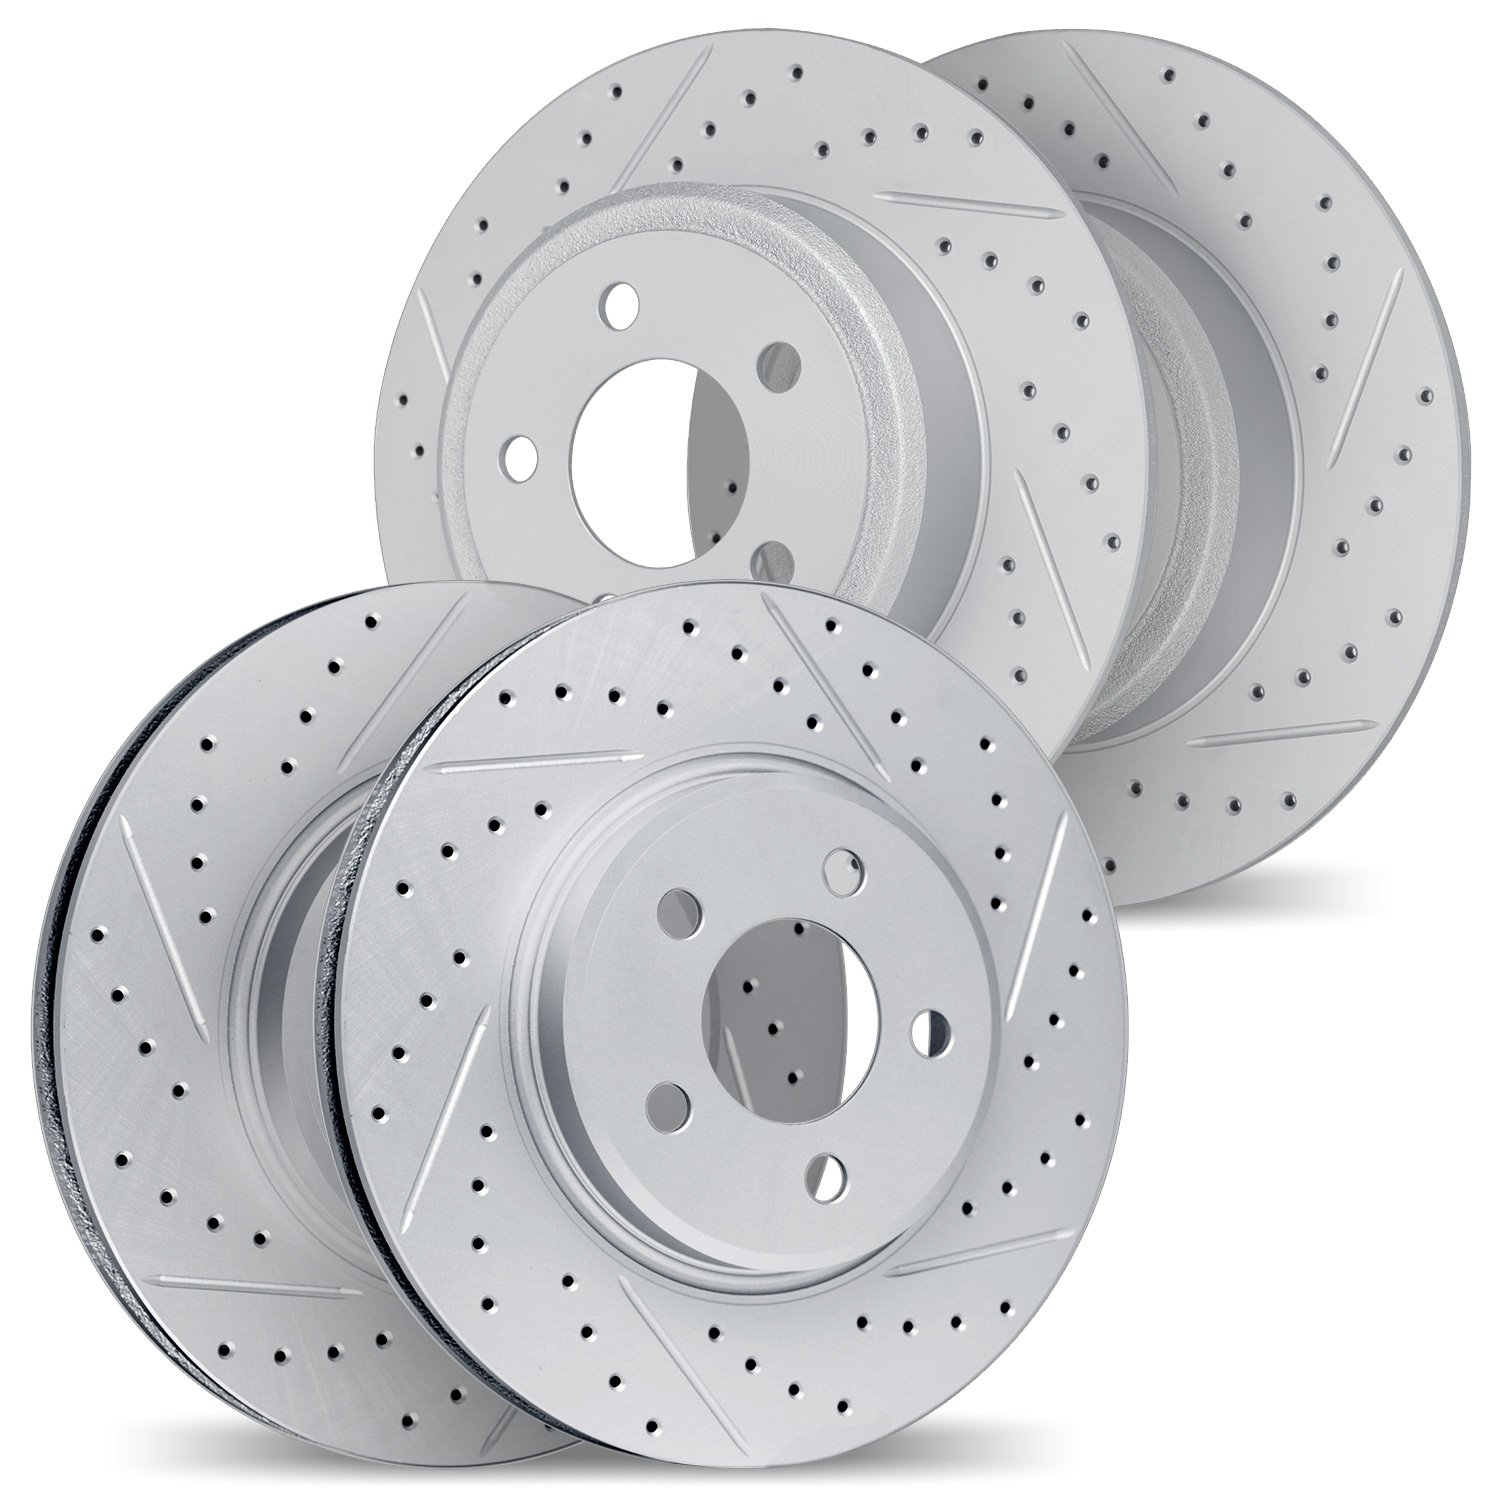 2004-80007 Geoperformance Drilled/Slotted Brake Rotors, 2007-2013 Ford/Lincoln/Mercury/Mazda, Position: Front and Rear